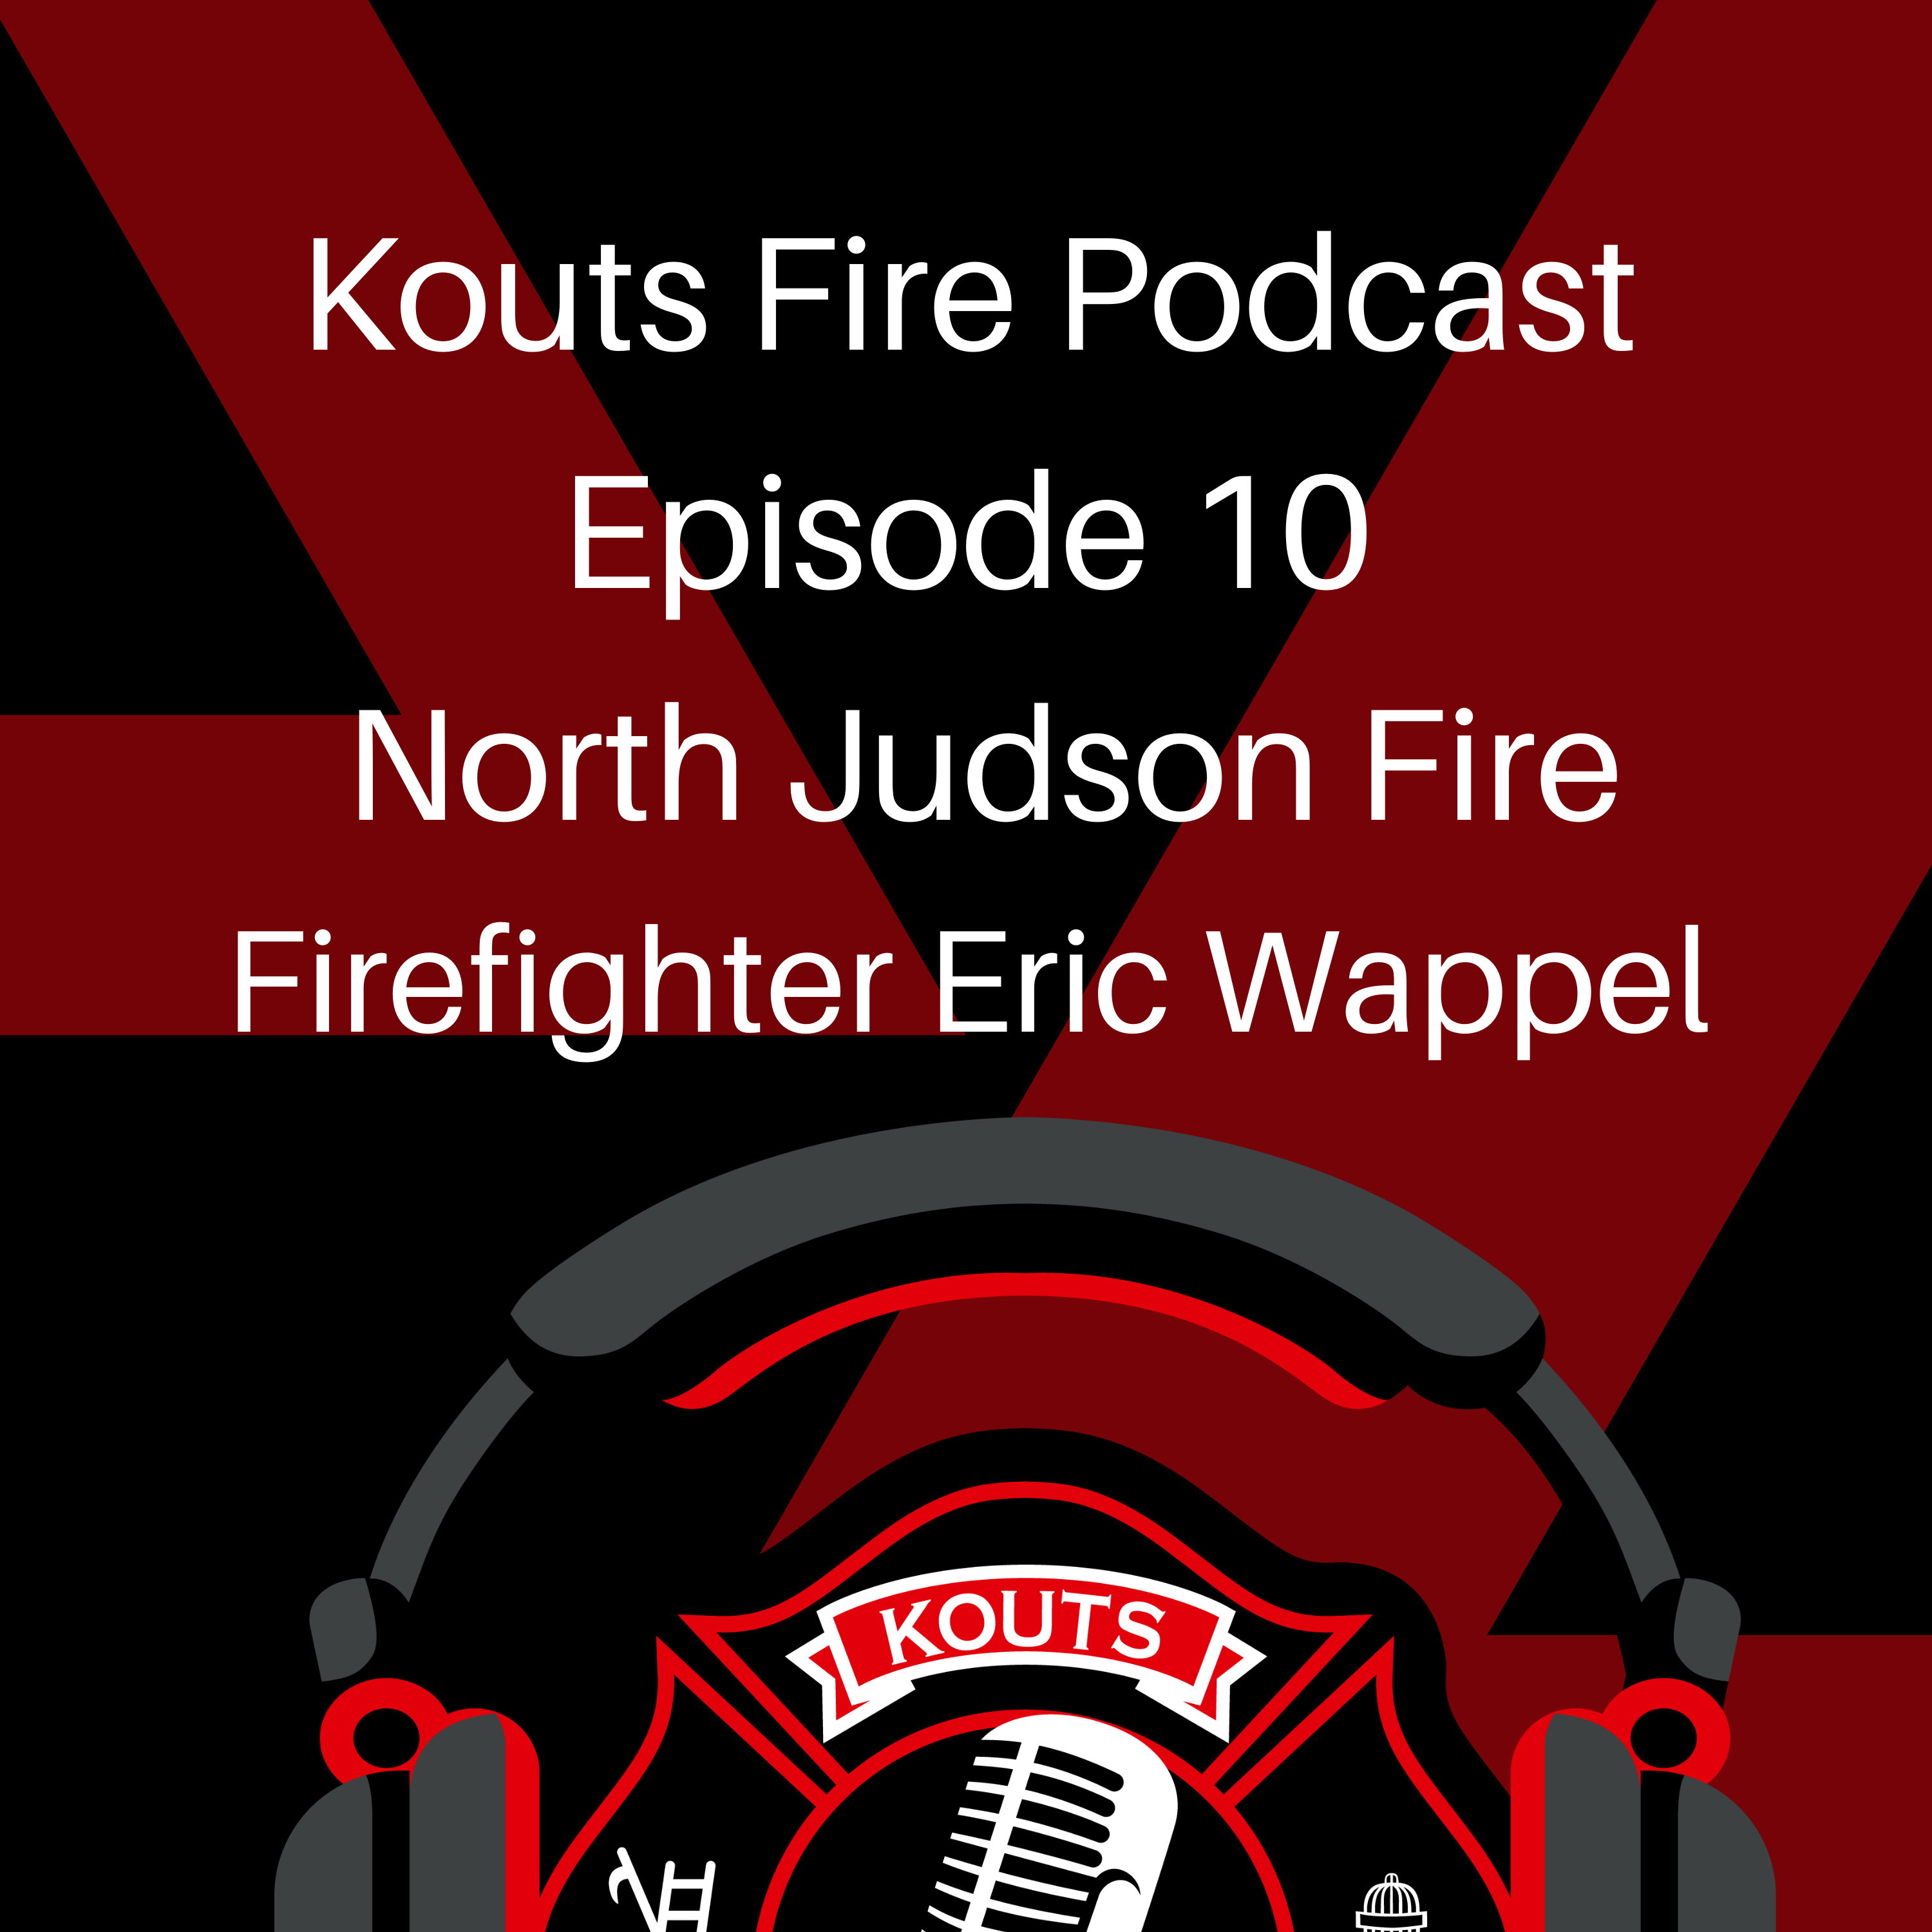 North Judson Firefighter Eric Wappel